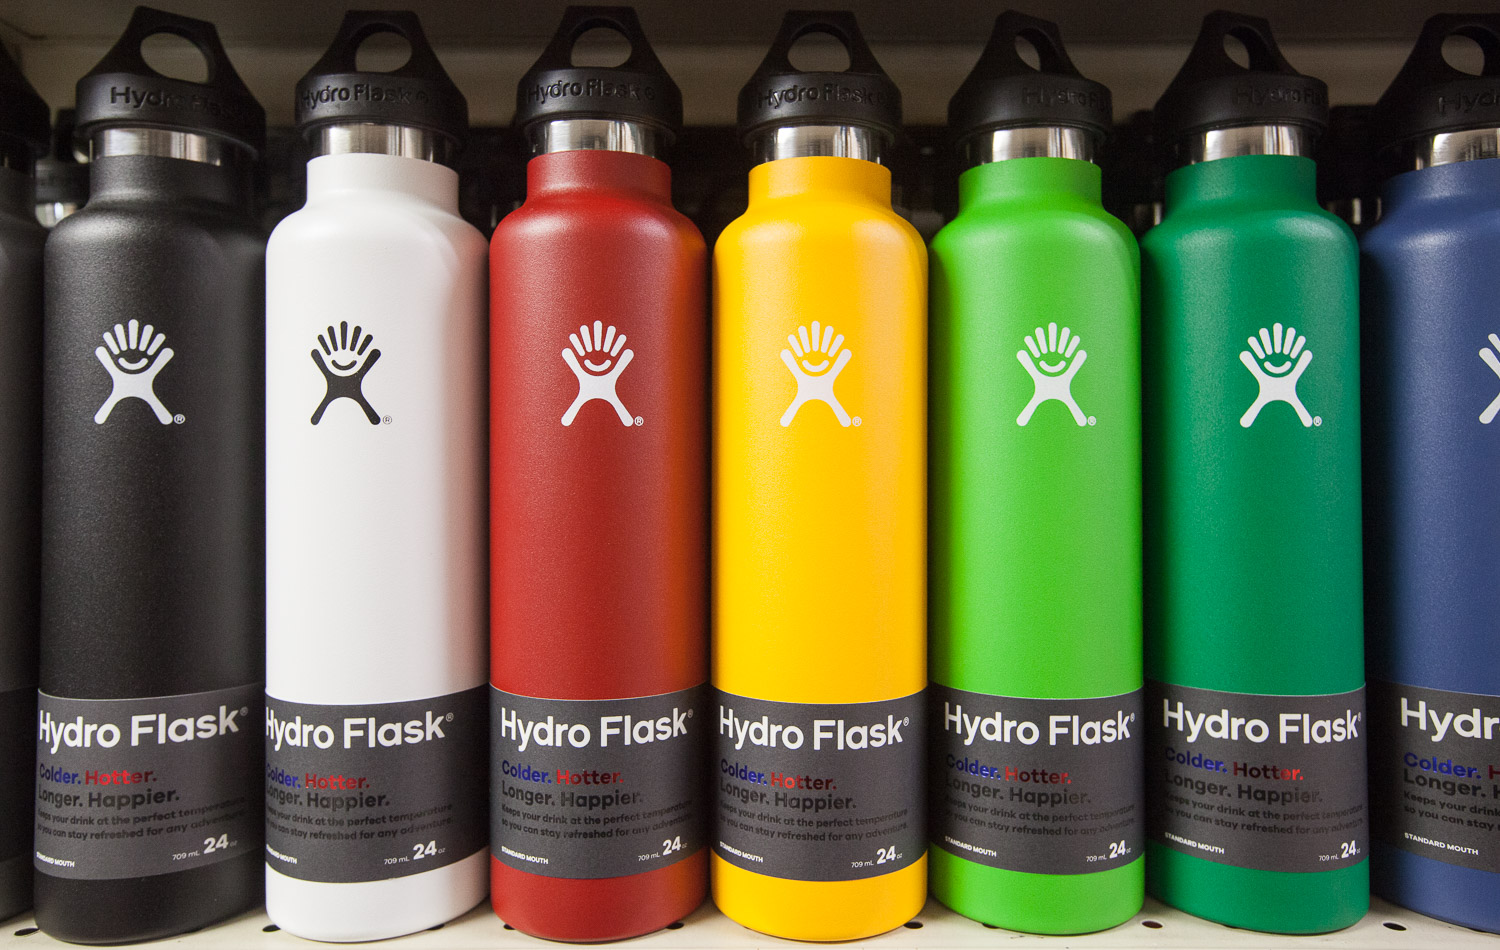 small-hydro-flasks-mana-foods-gifts-household-department.jpg